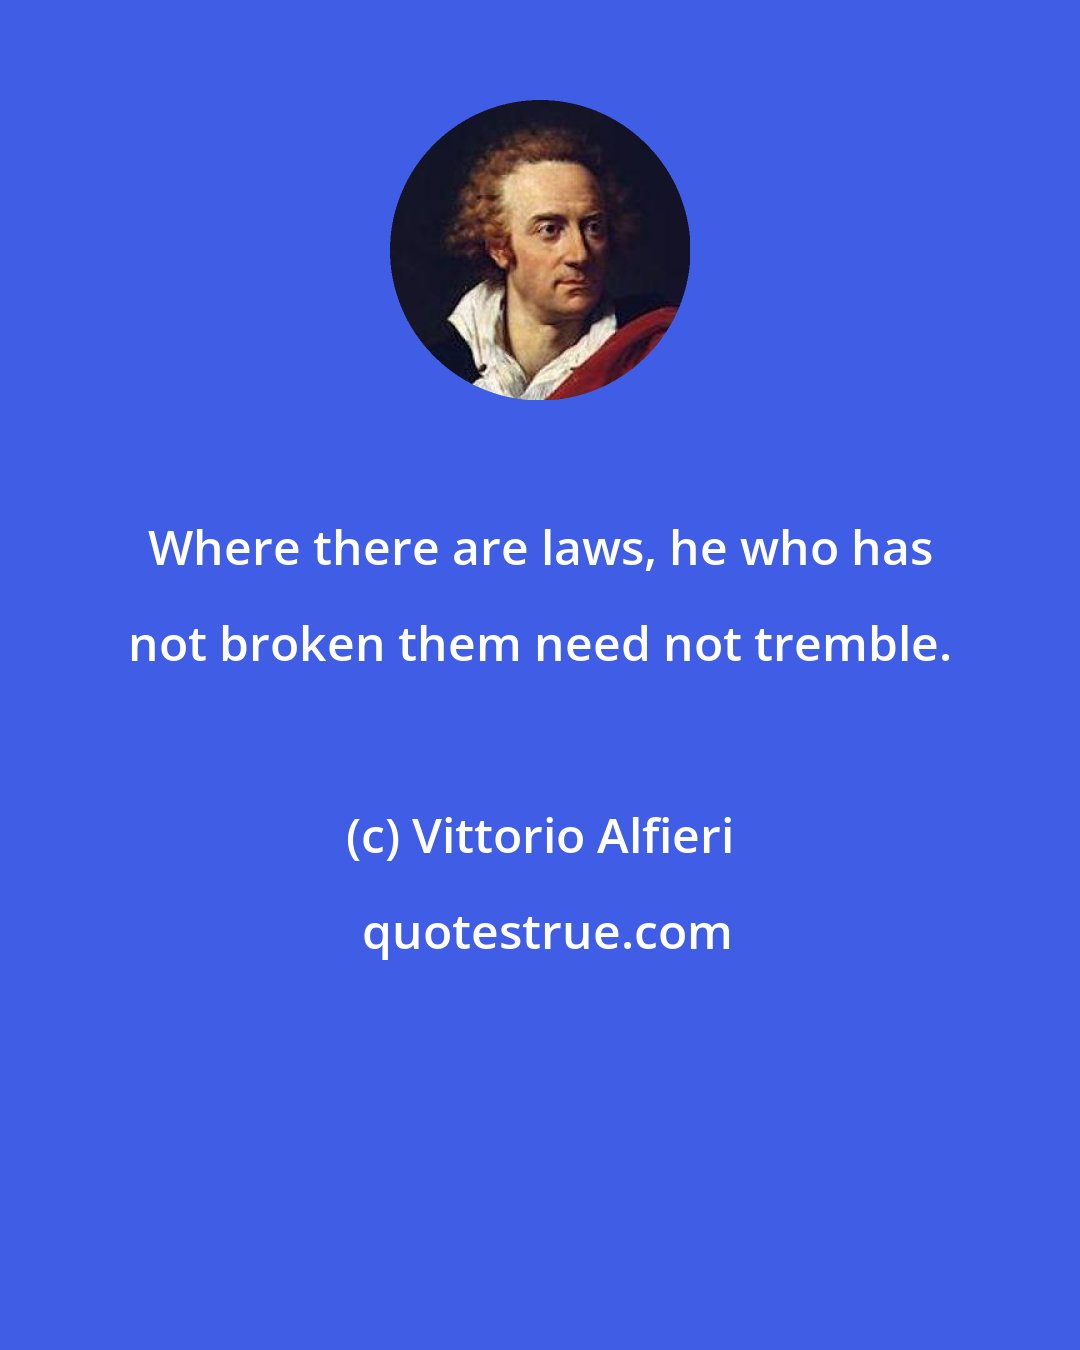 Vittorio Alfieri: Where there are laws, he who has not broken them need not tremble.